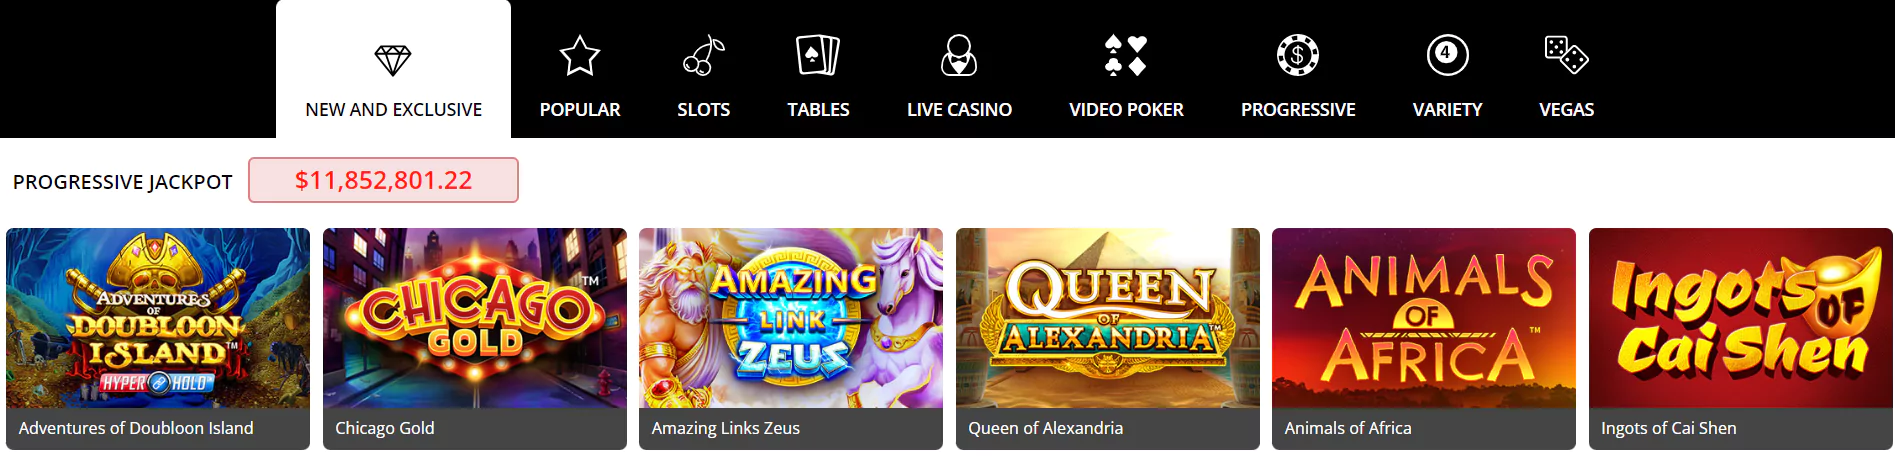 Screenshot of Games in Canadian Casinos with $10 Deposit